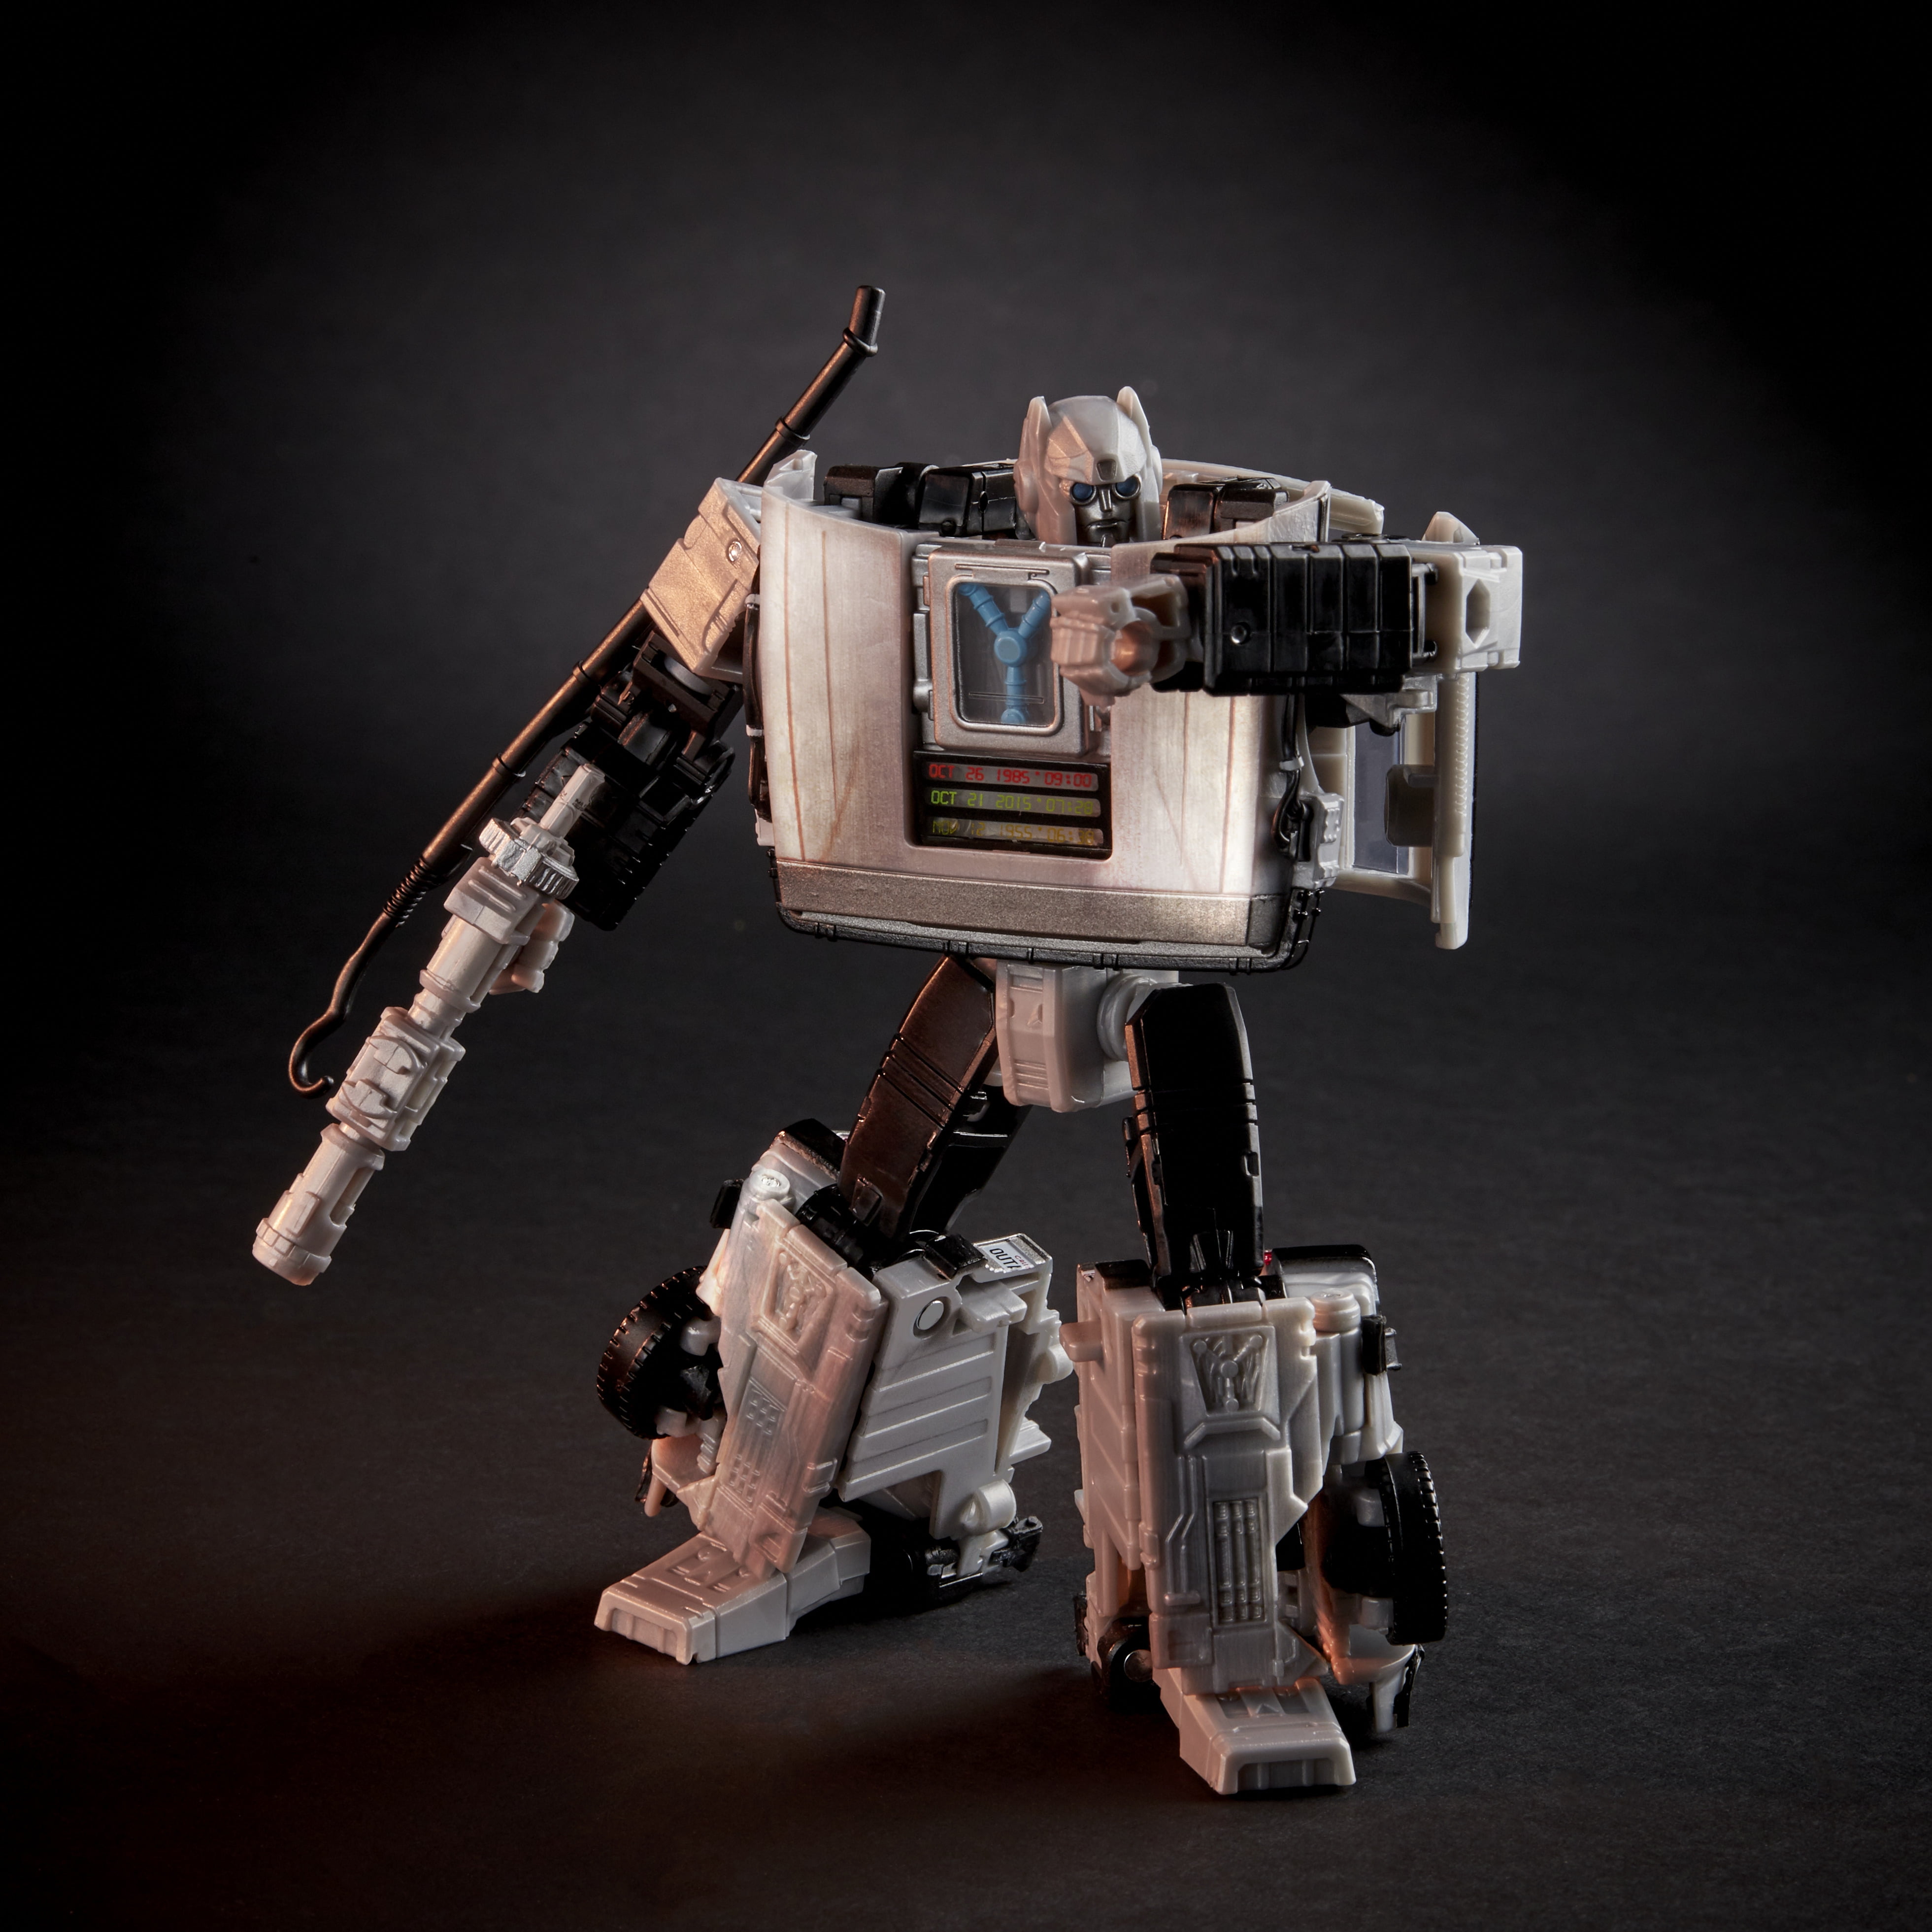 Details about   Transformers Toys Generations Collaborative Back to The Future Mash-Up,... 